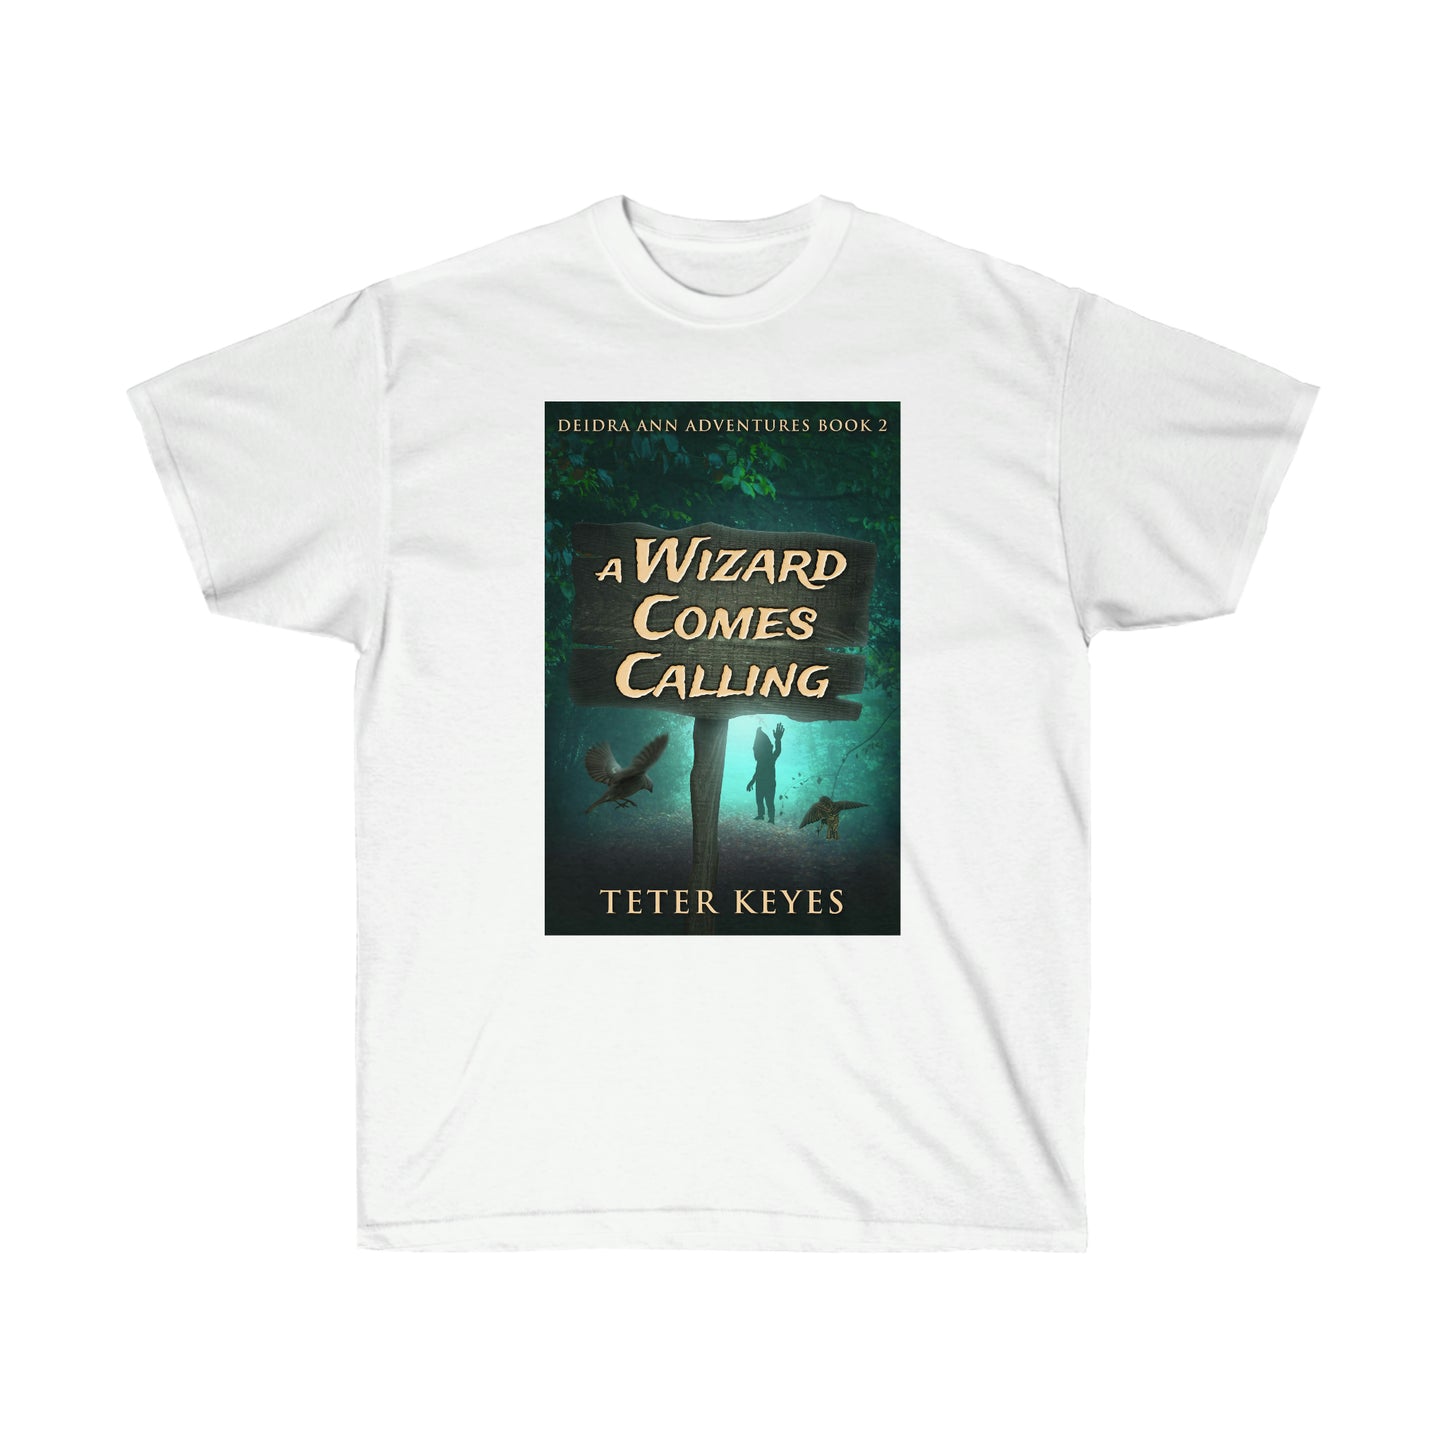 A Wizard Comes Calling - Unisex T-Shirt